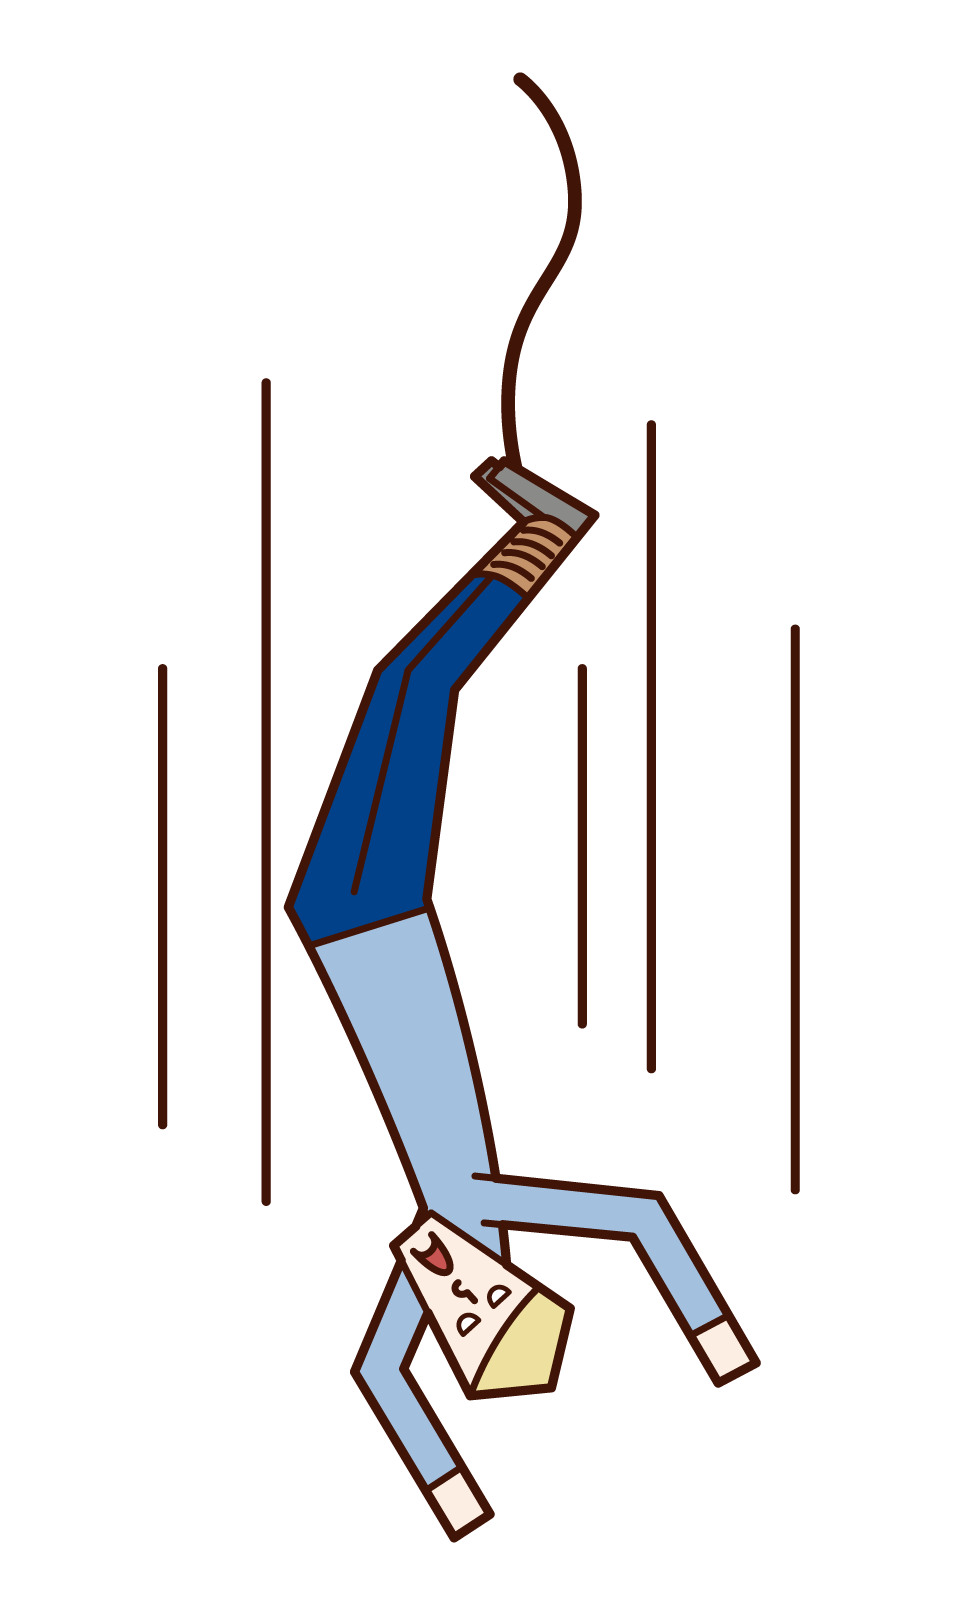 Illustration of a man bungee jumping